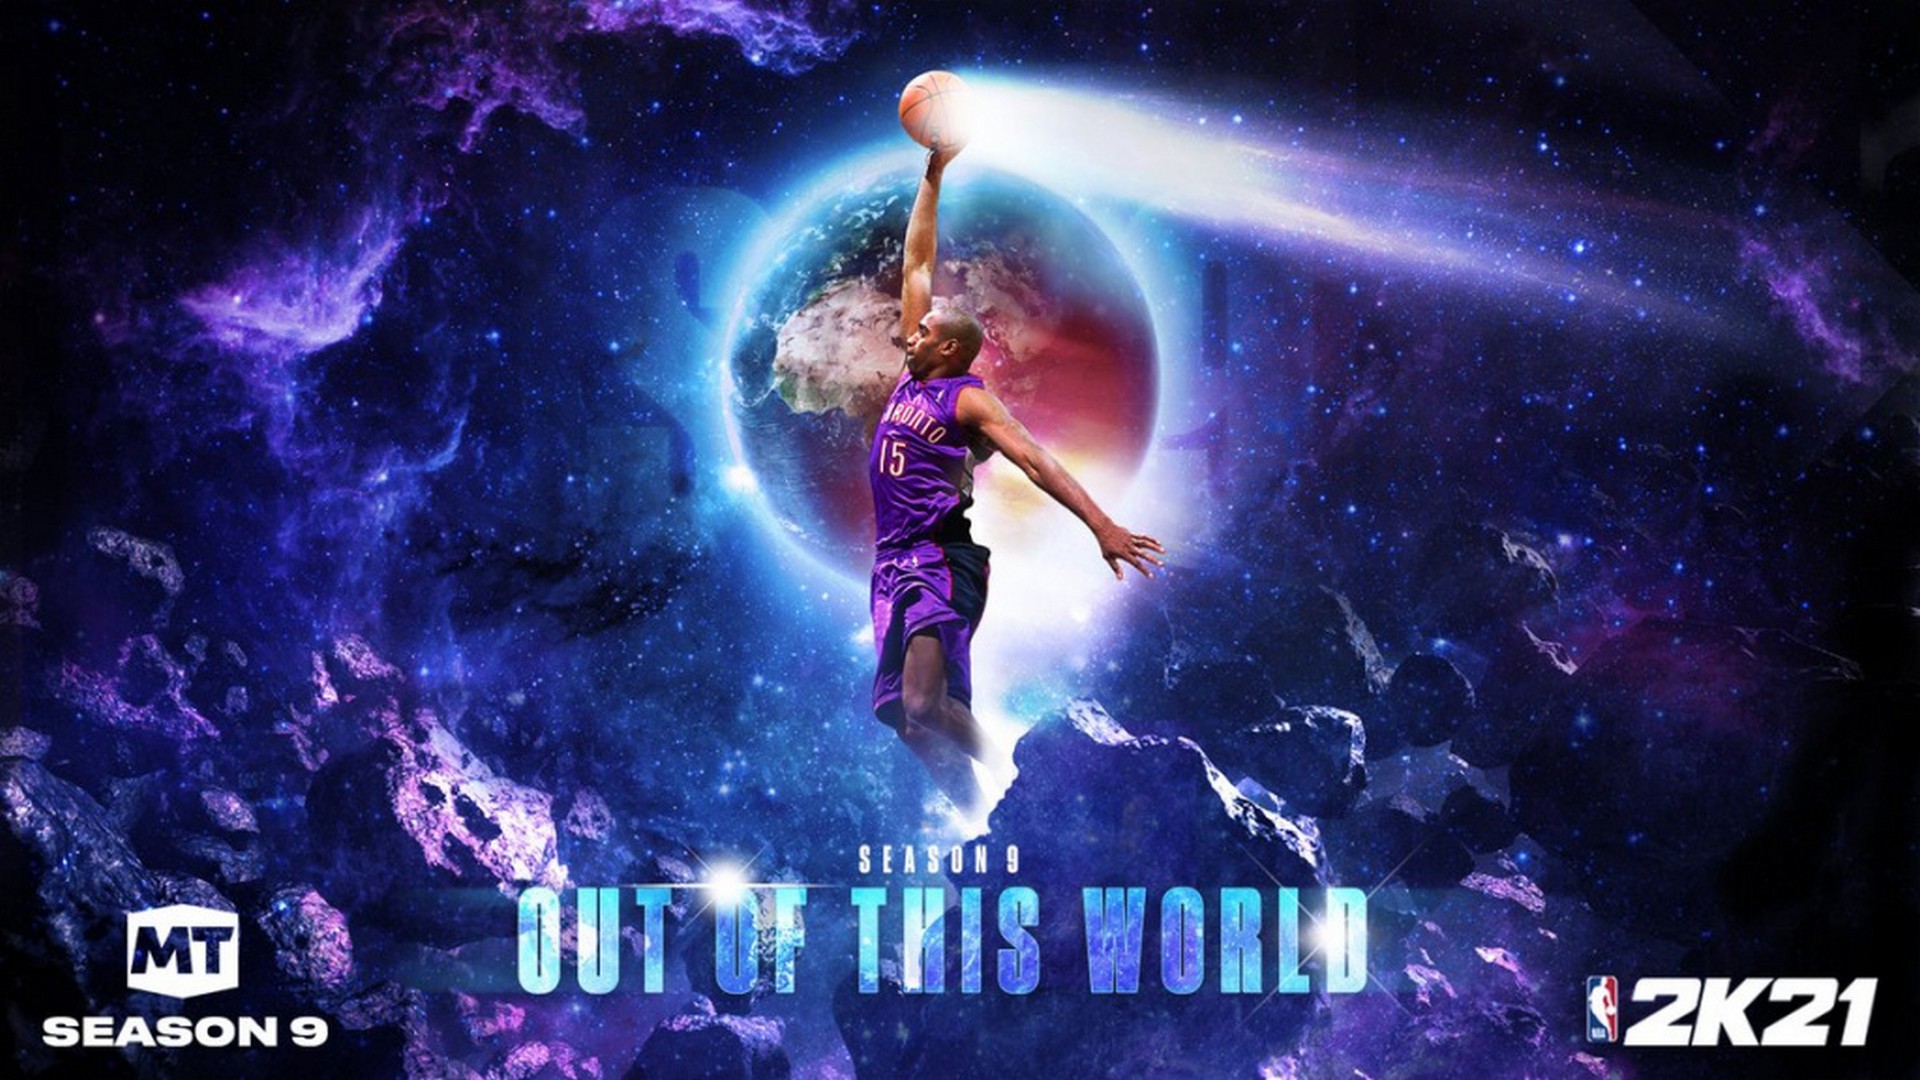 Welcome To The Jam: NBA 2K21 MyTEAM Season 9 “Out Of This World!” Available Now